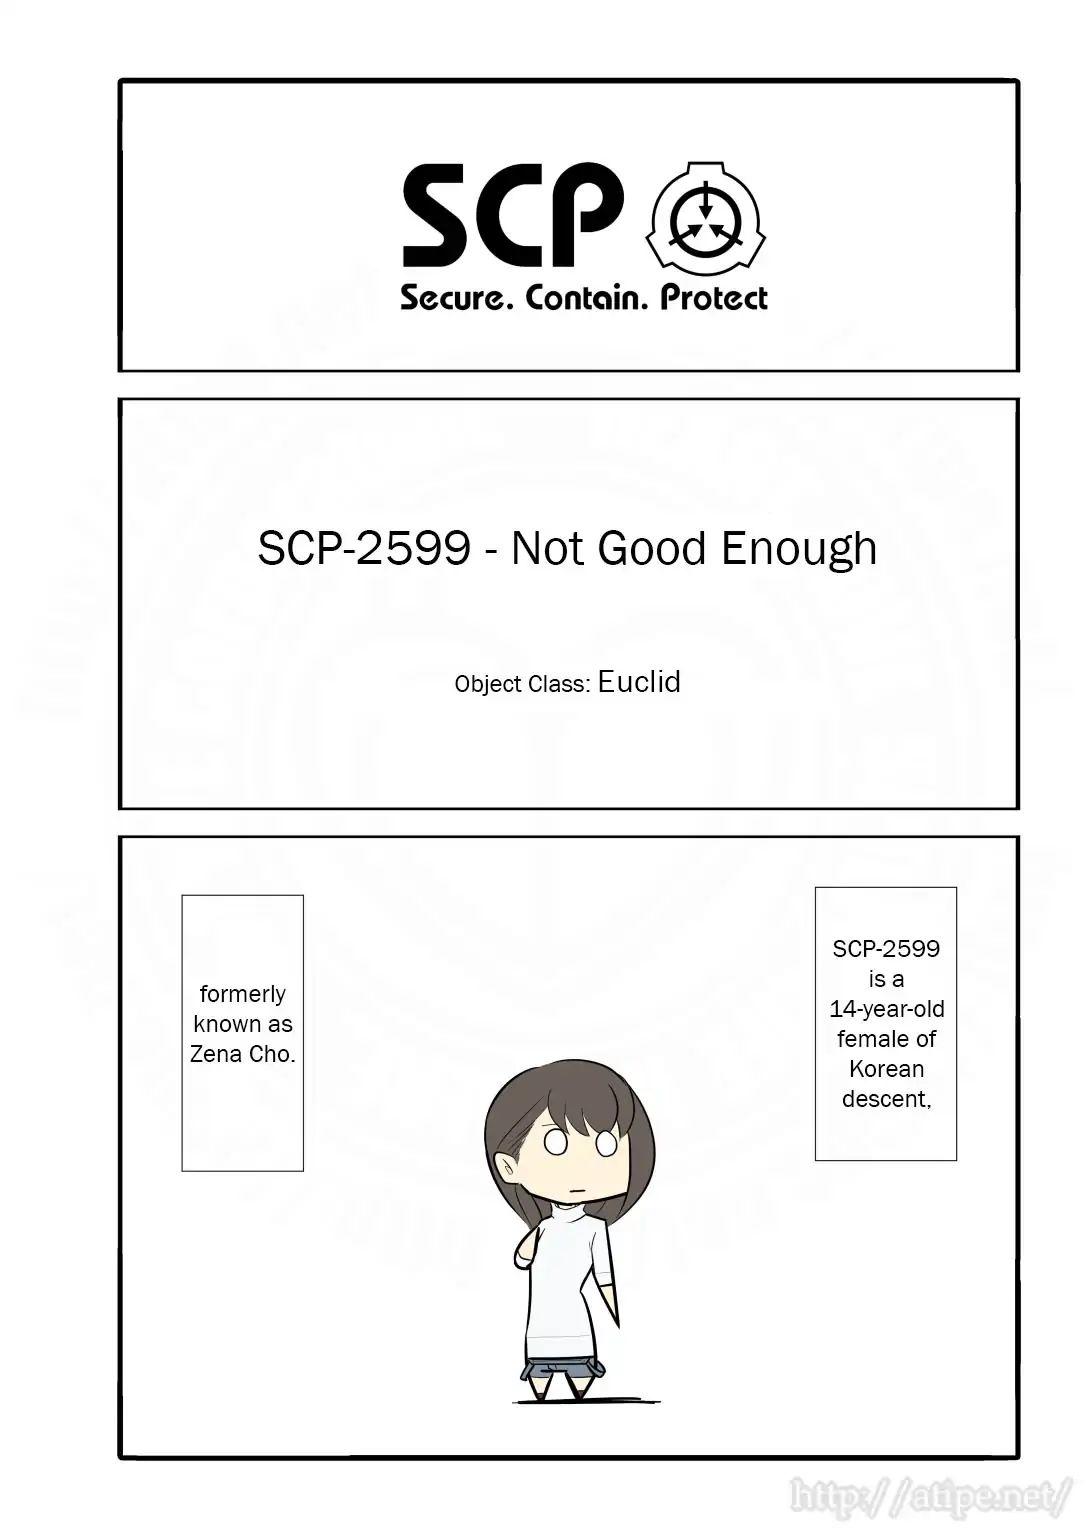 SECURED - CONTAINED - PROTECTED - SCP-001 Lily's Proposal EAS 